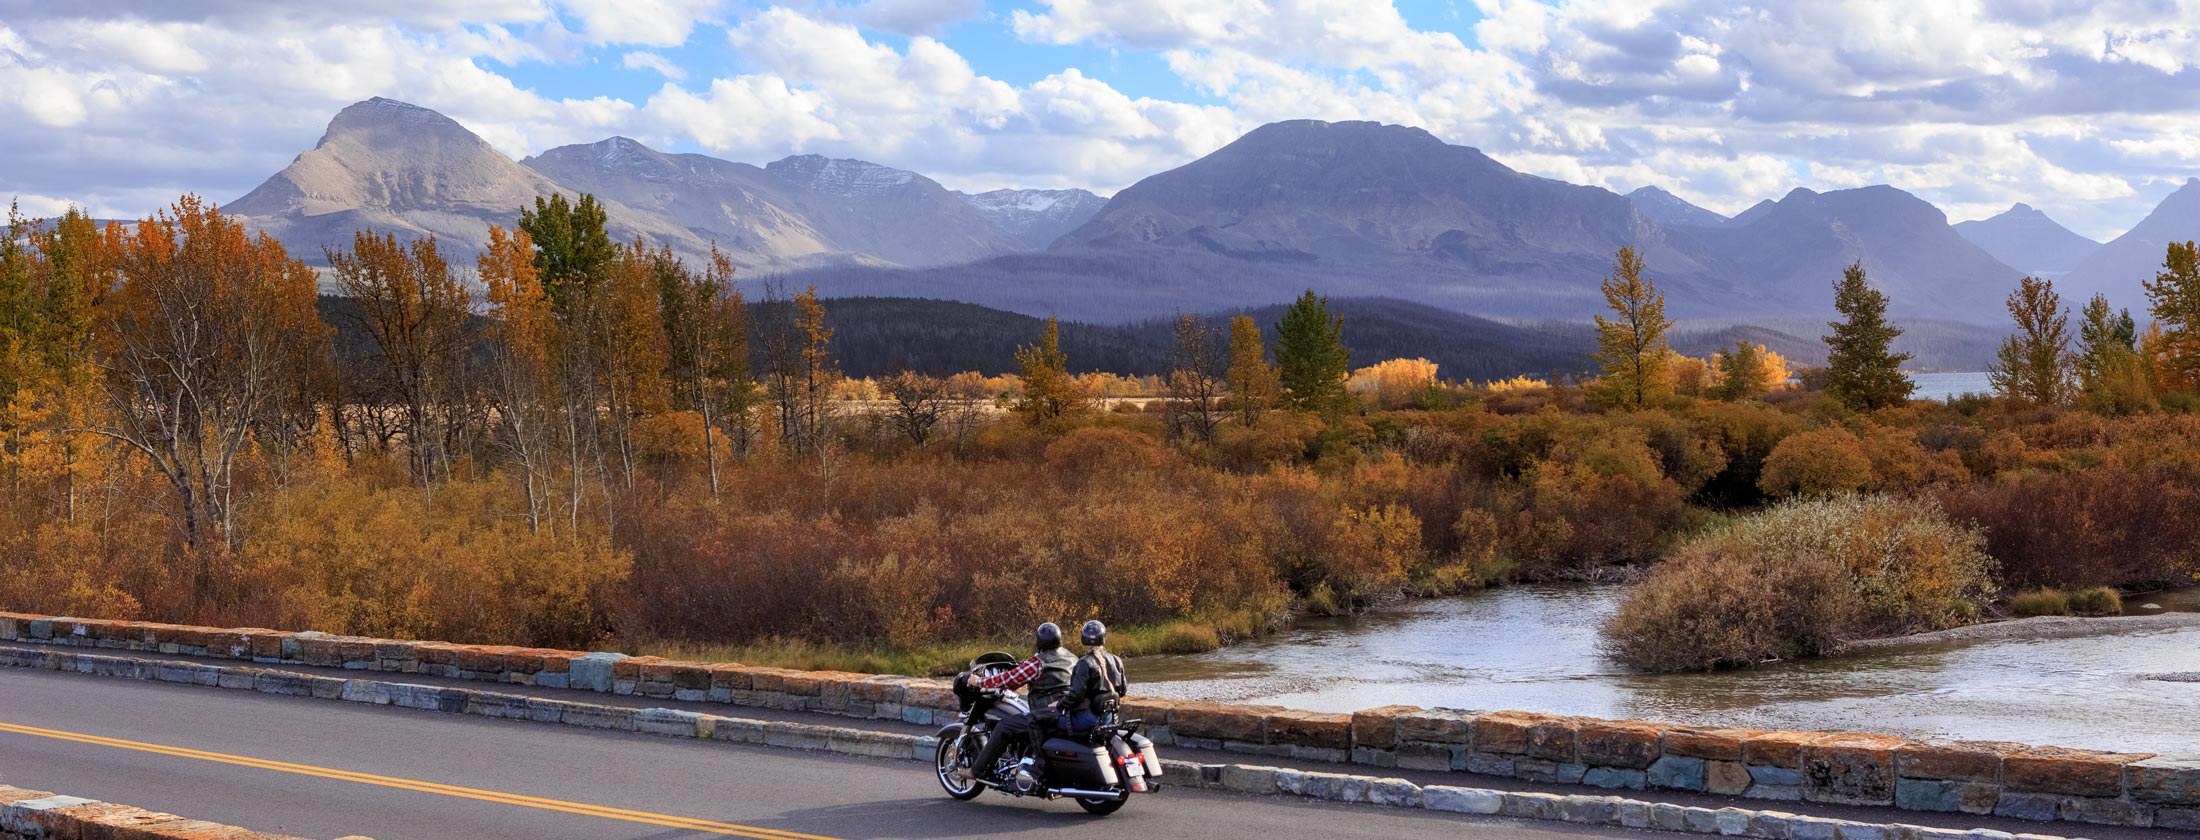 Motorcycling in Glacier and Yellowstone Country